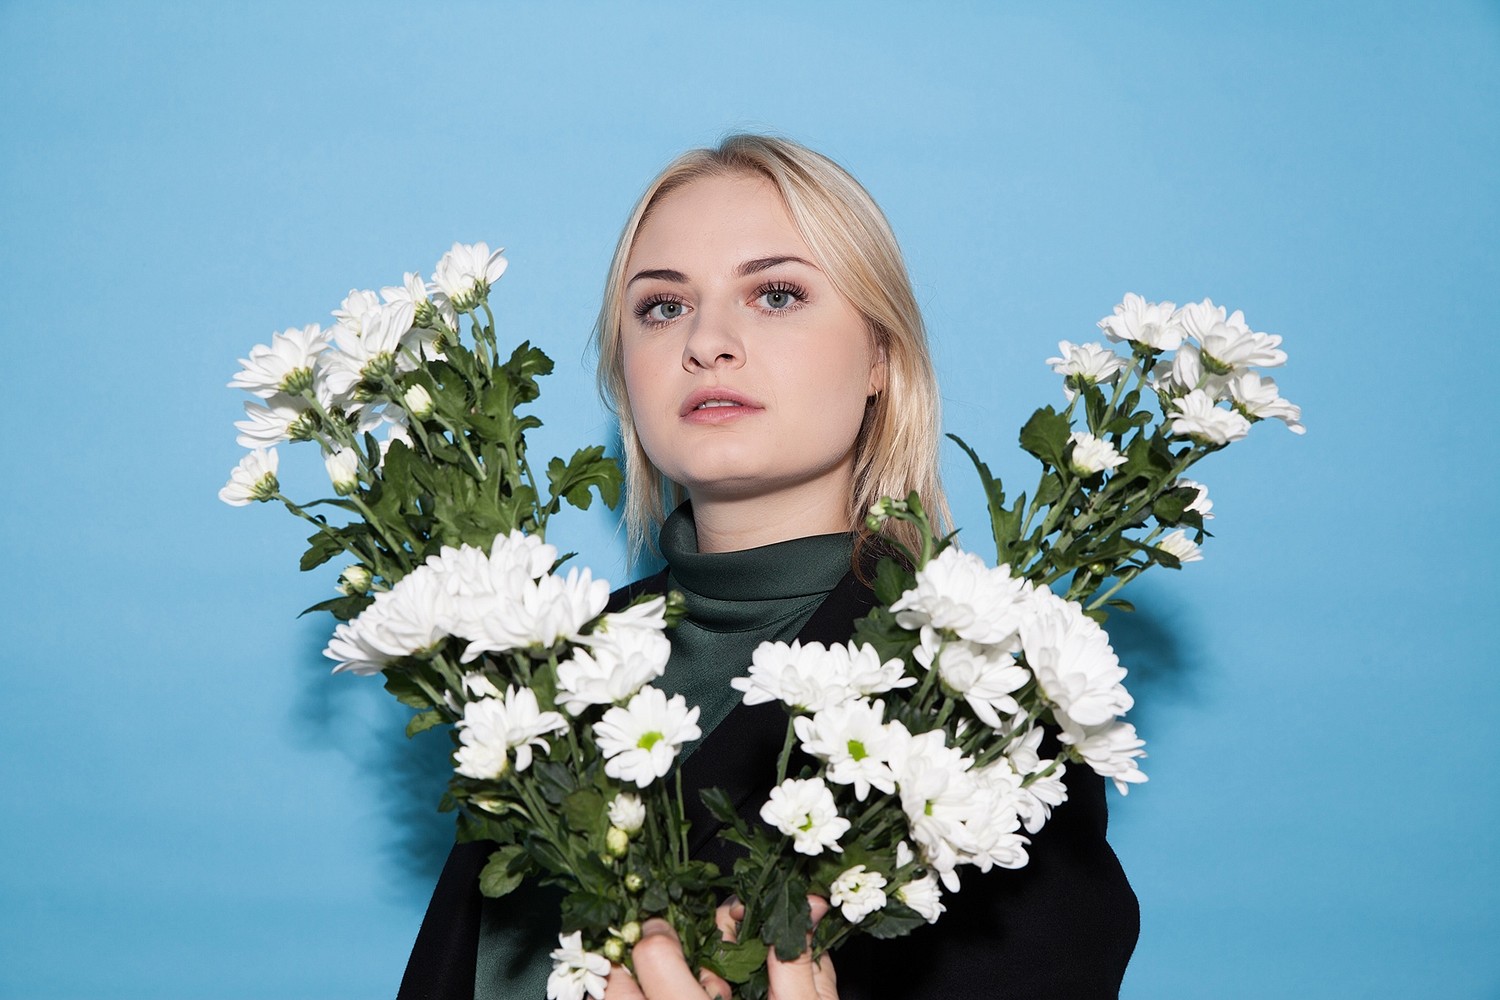 Låpsley, from school pupil to pop star